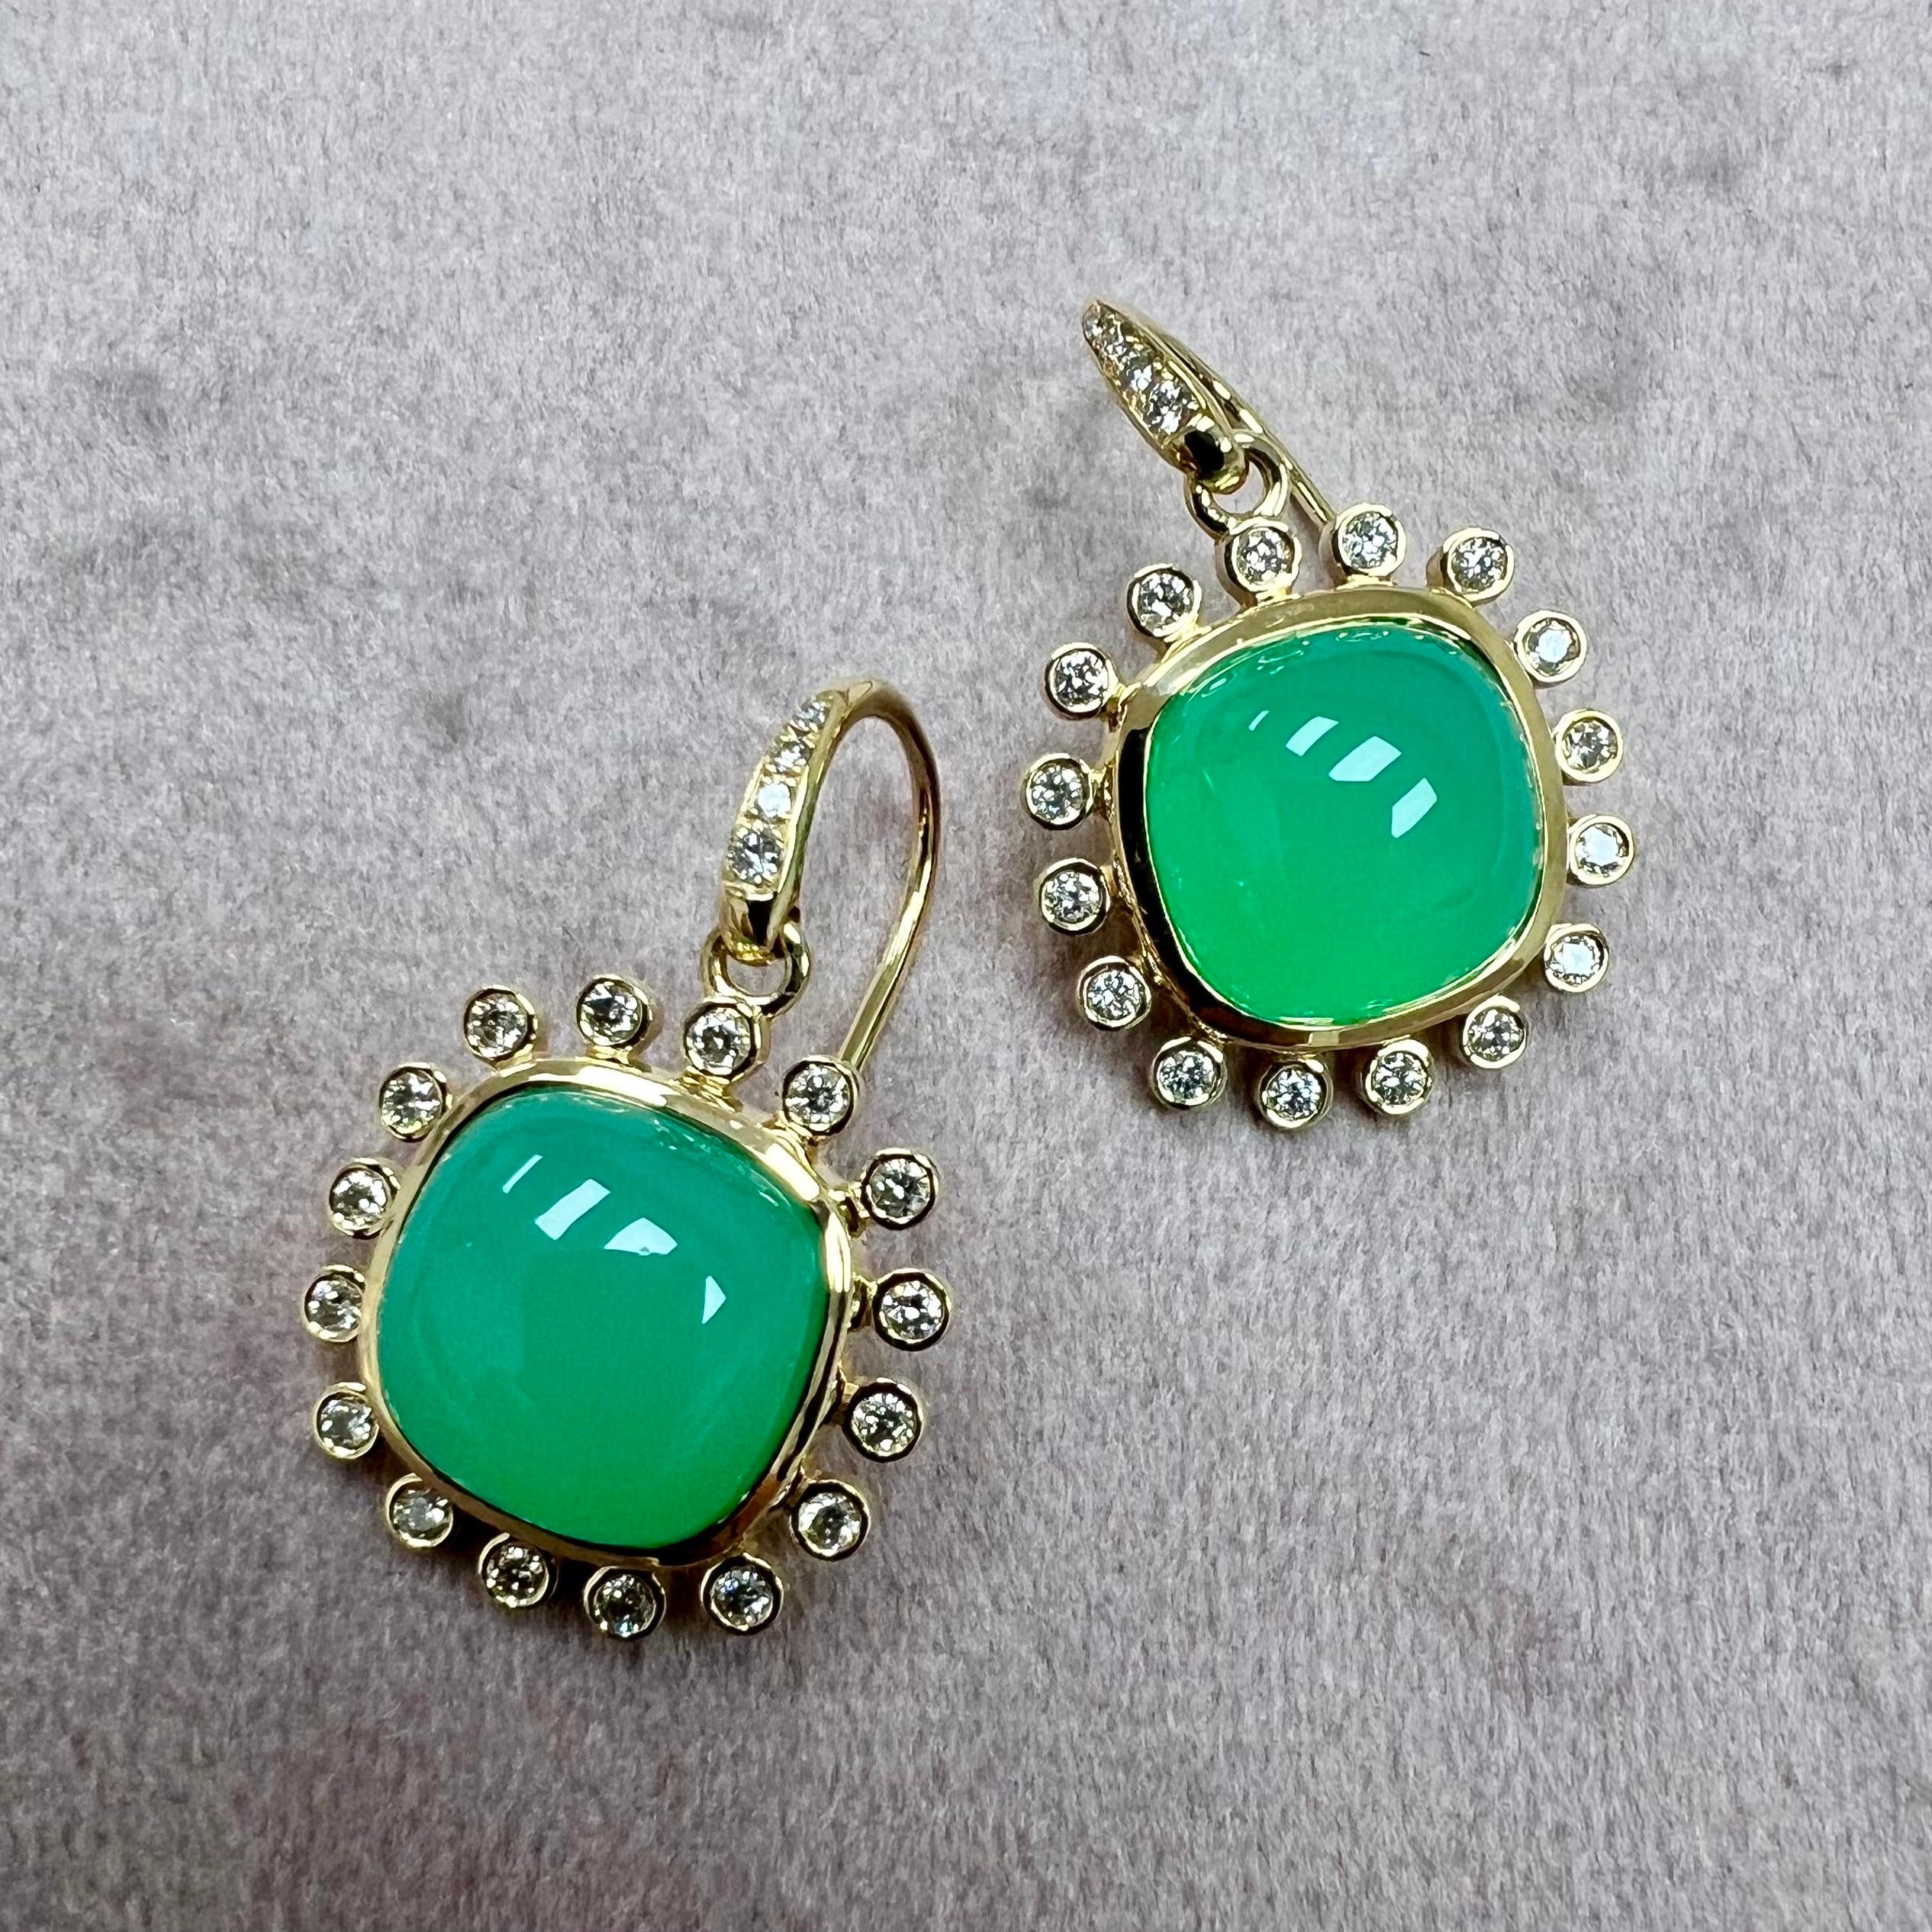 Created in 18 karat yellow gold
Chrysoprase 10 carats approx.
Diamonds 0.35 carat approx.
French wire for pierced ears



About the Designers

Drawing inspiration from little things, Dharmesh & Namrata Kothari have created an extraordinary and